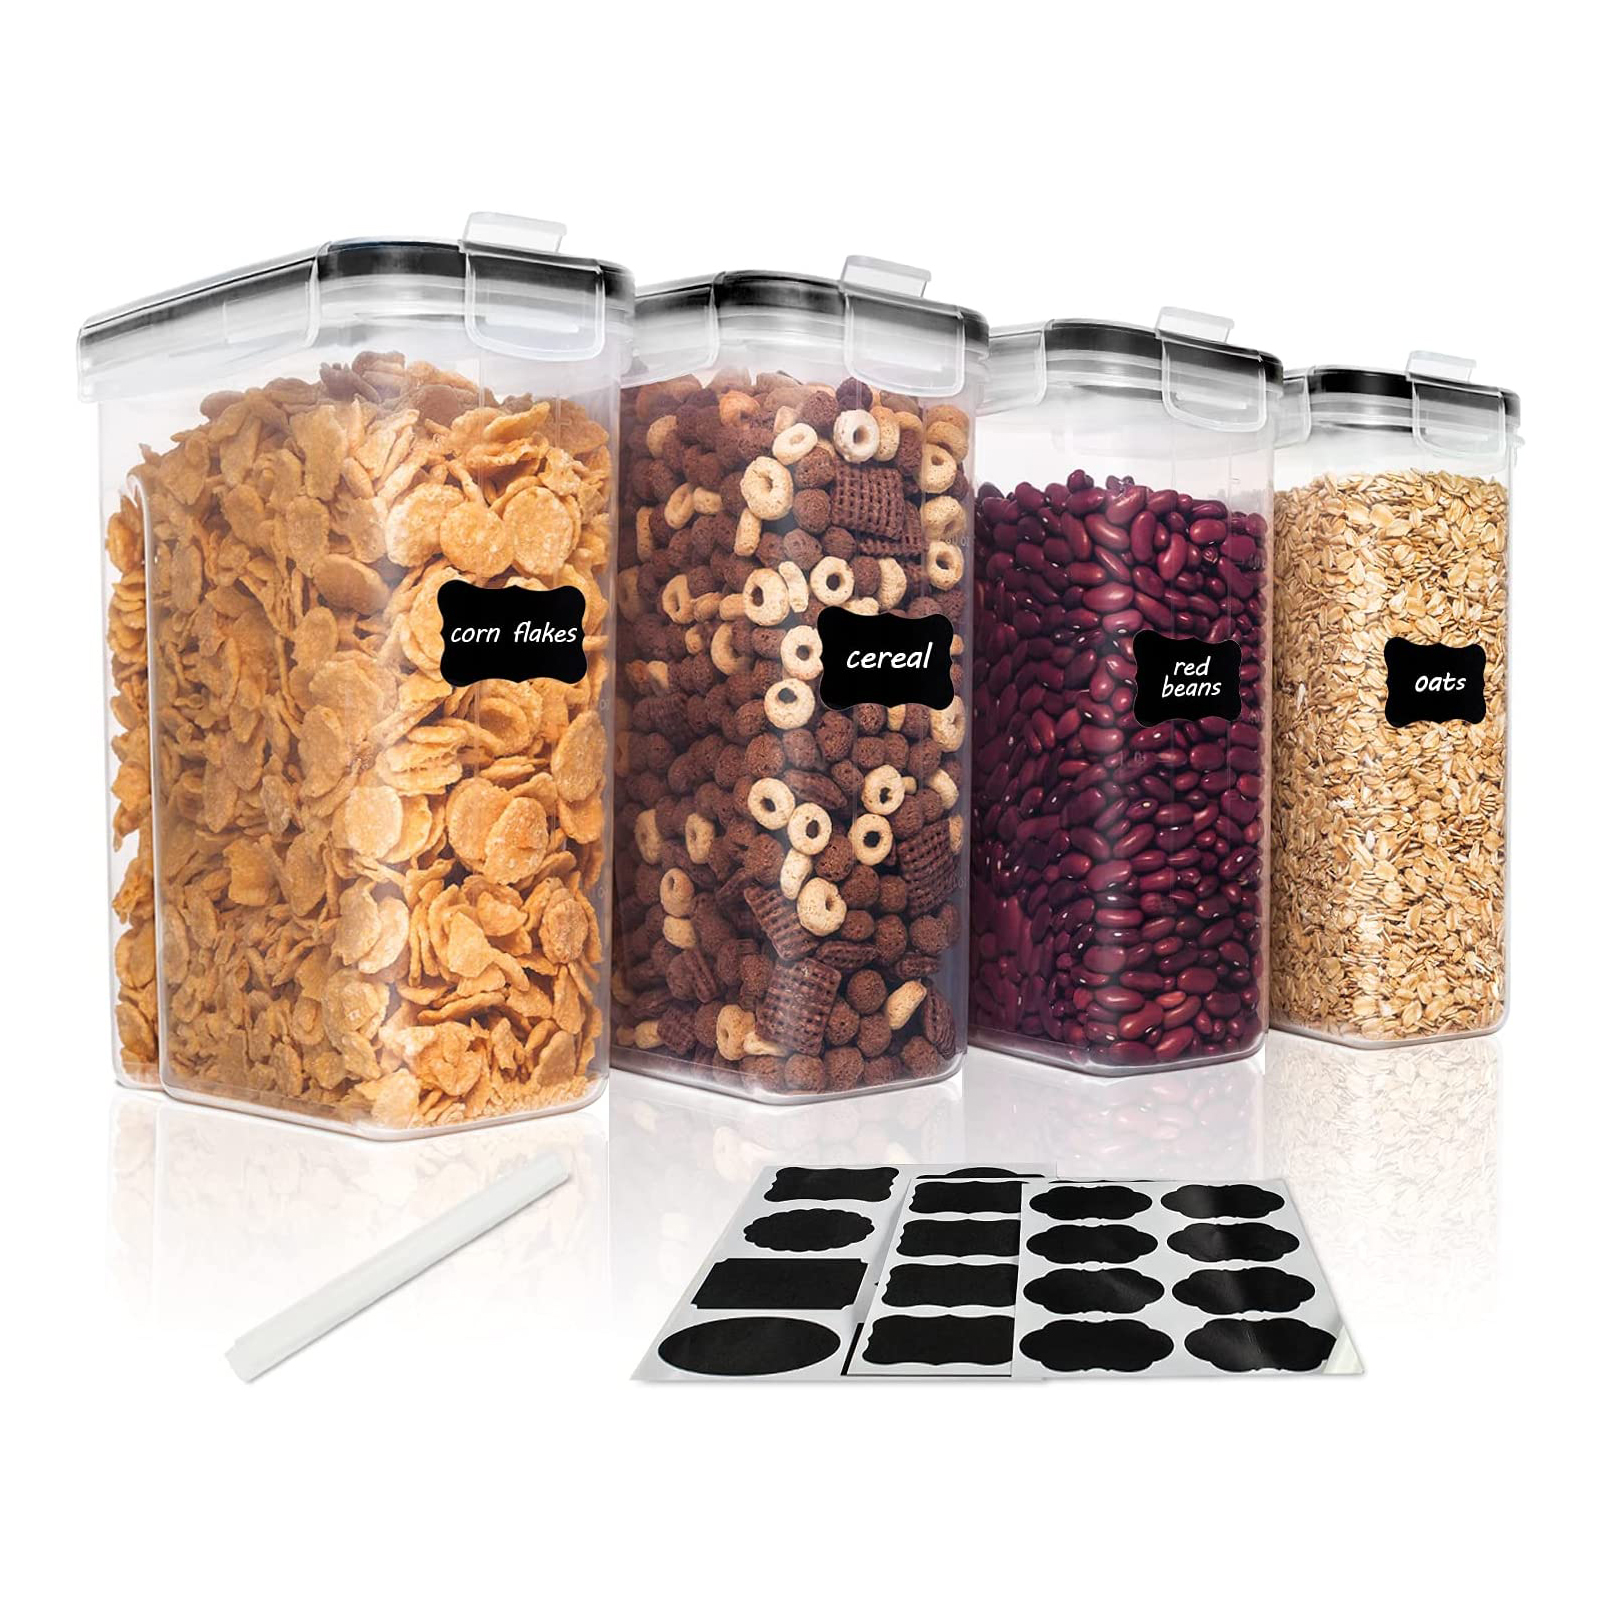 6 PCS Food Cereal Storage Containers Set with Lids 2.5L Set of 6